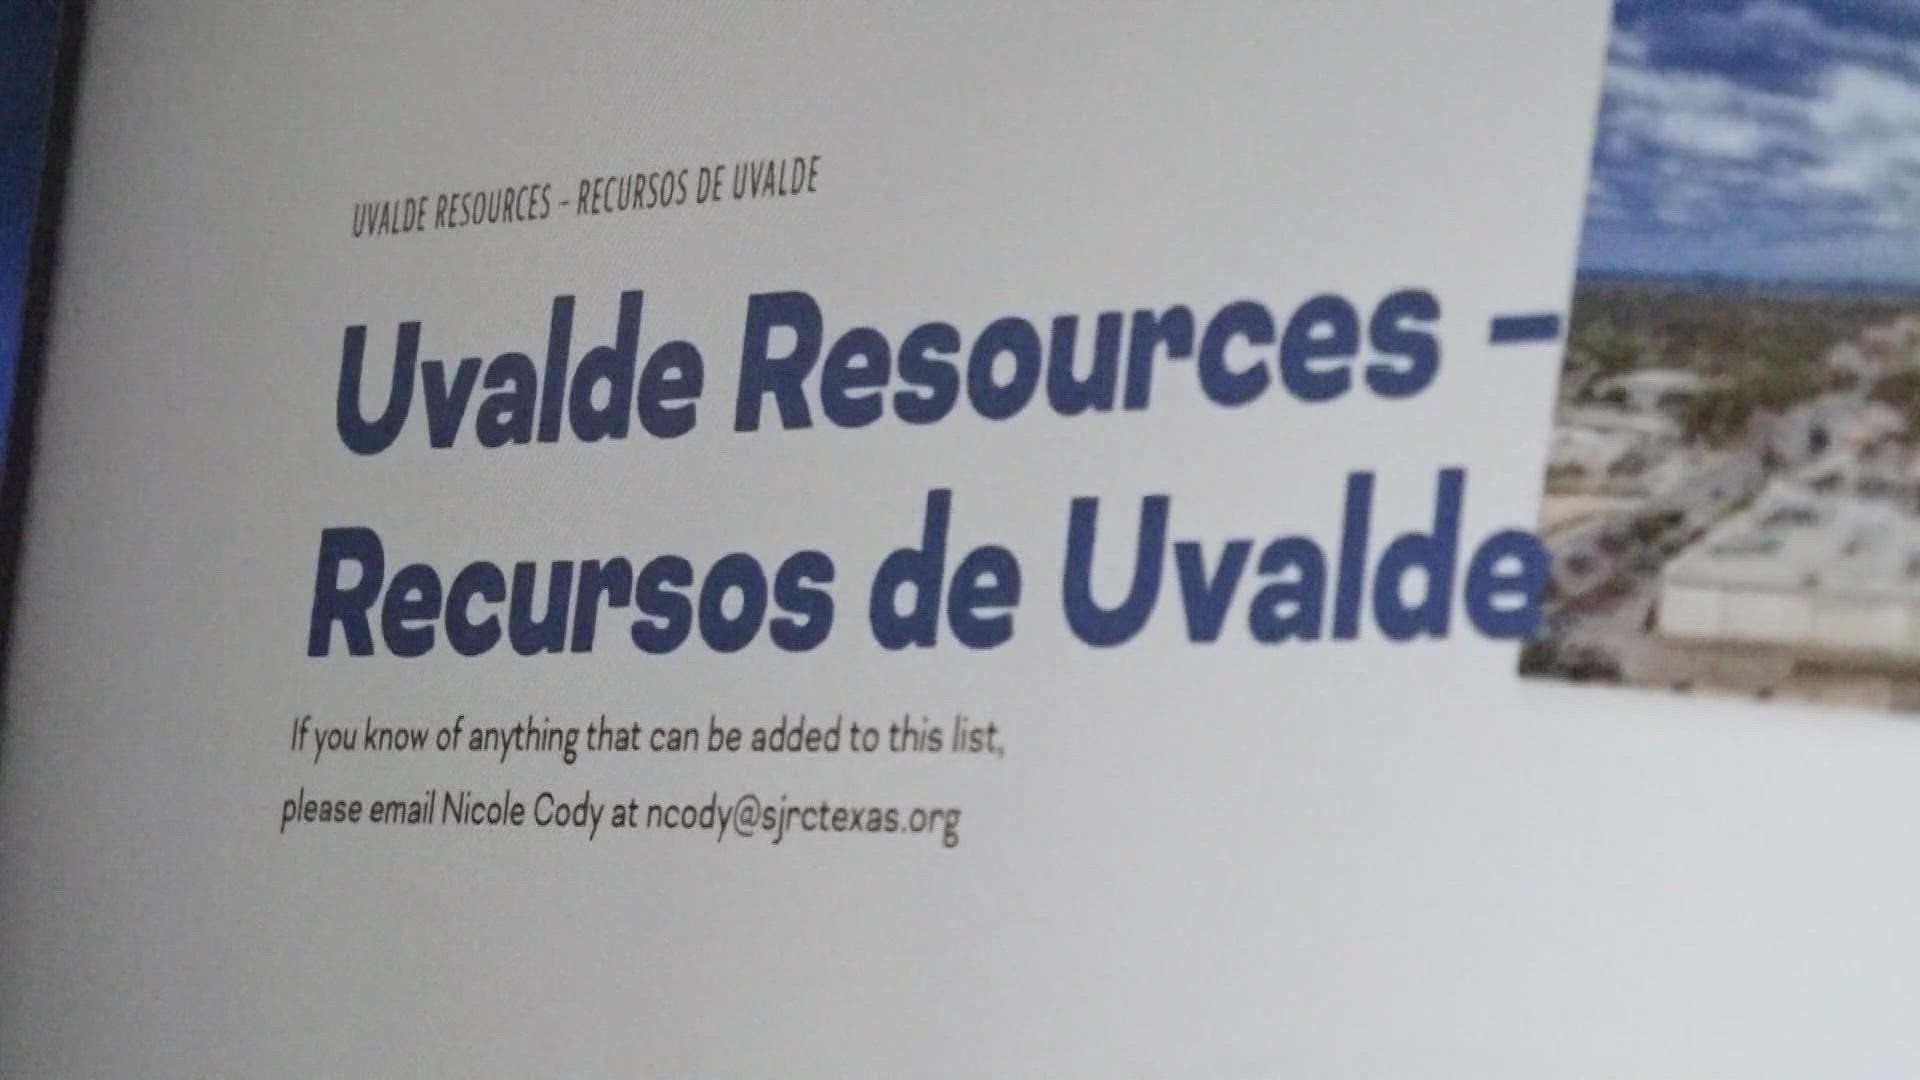 Bridging the gap between grief and healing. One organization is putting together resources both for the Uvalde community and those who want to help.